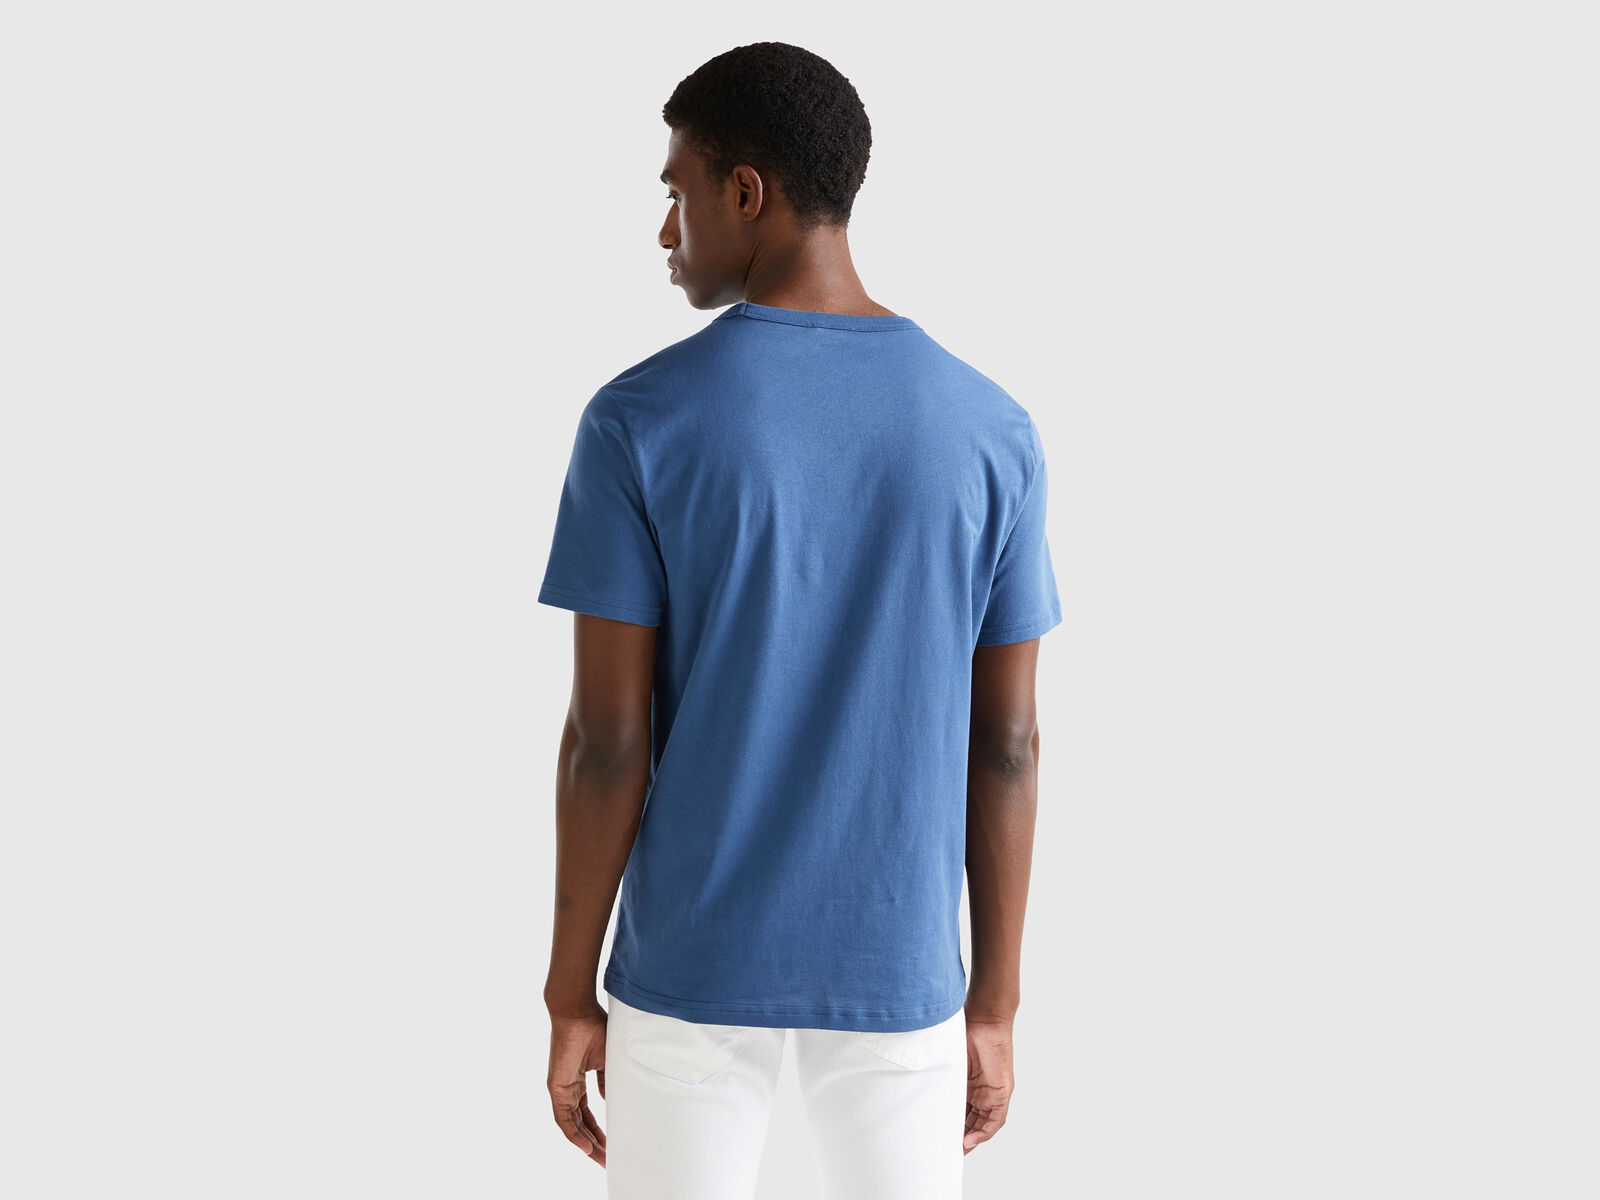 Blue Benetton in Air logo force | print Force t-shirt cotton - blue organic Air with